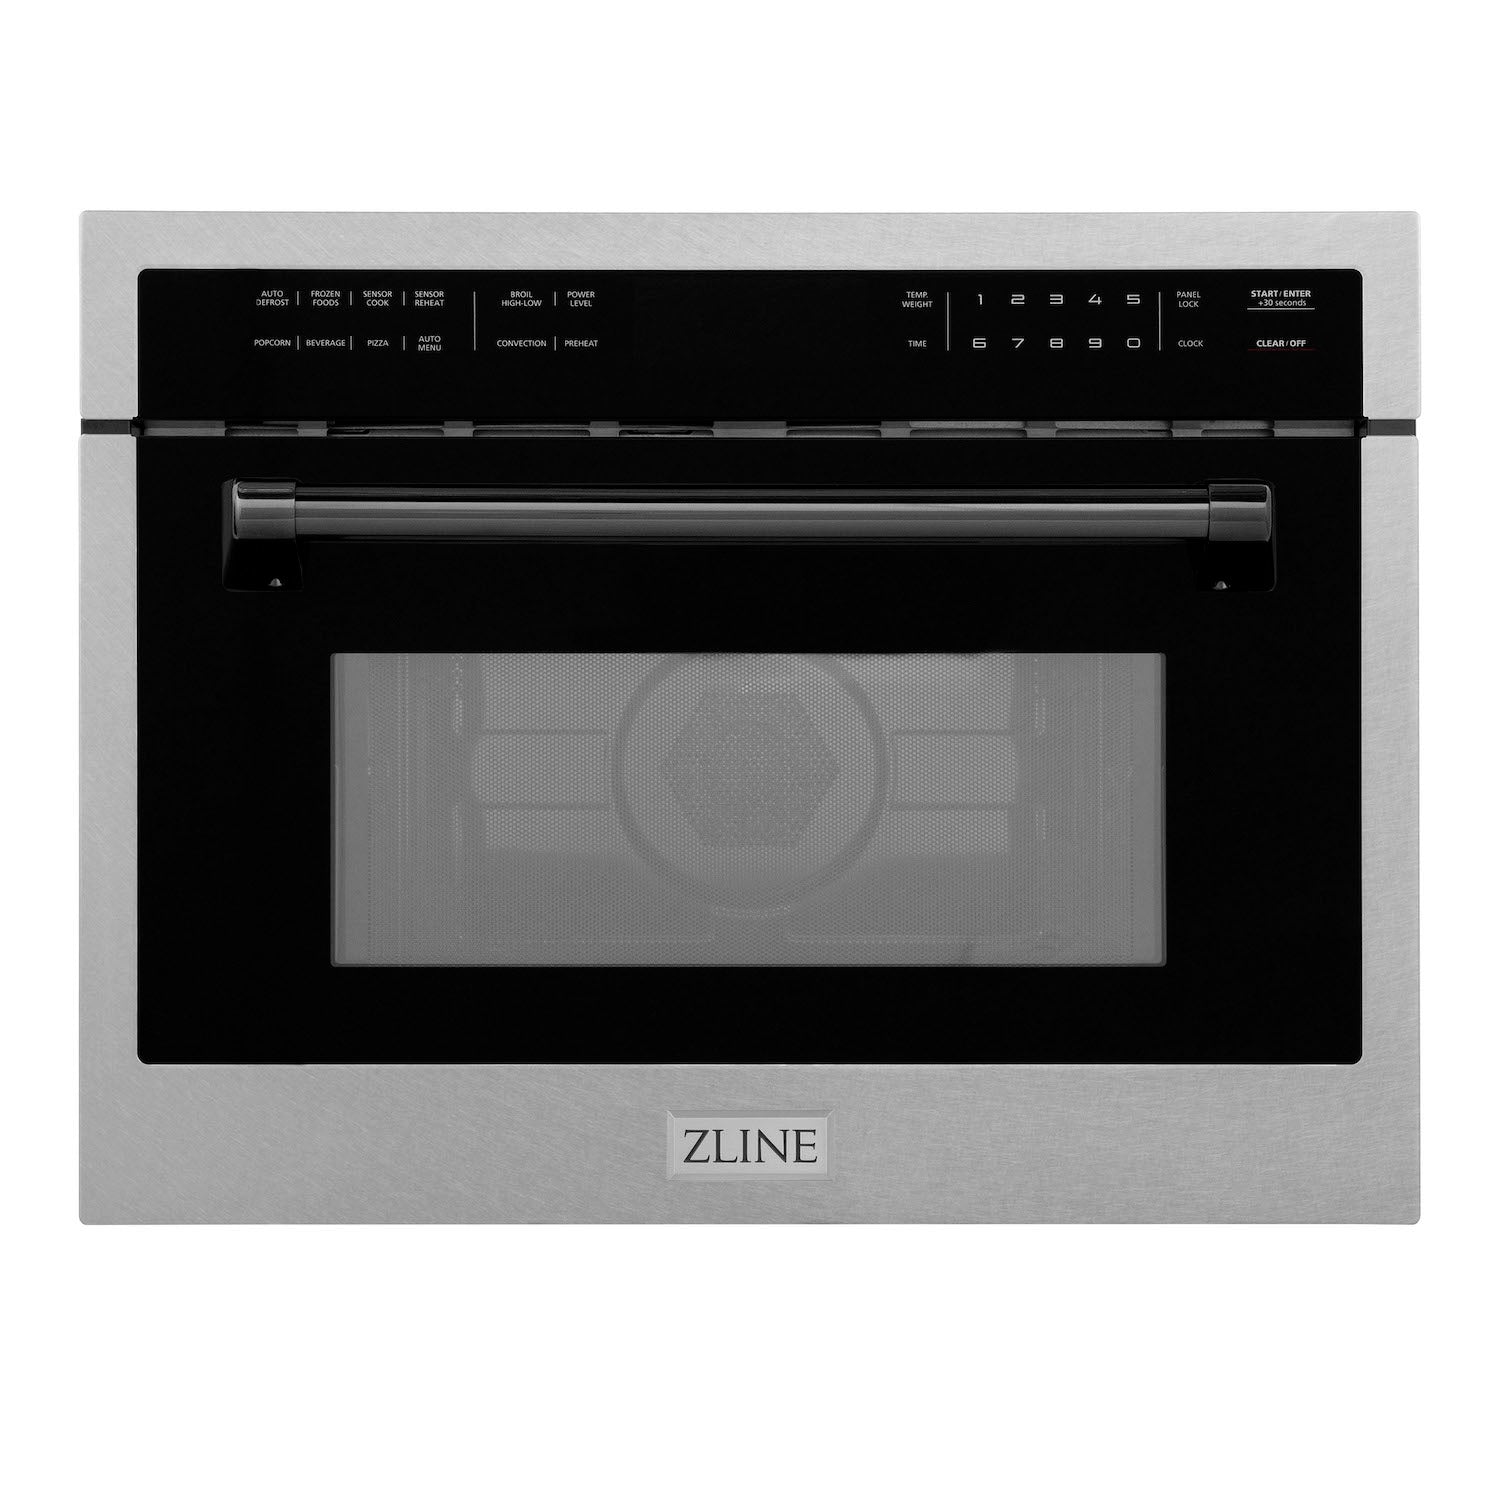 ZLINE Autograph Edition 24" 1.6 cu ft. Built-in Convection Microwave Oven in Fingerprint Resistant Stainless Steel with Matte Black Accents (MWOZ-24-SS-MB)